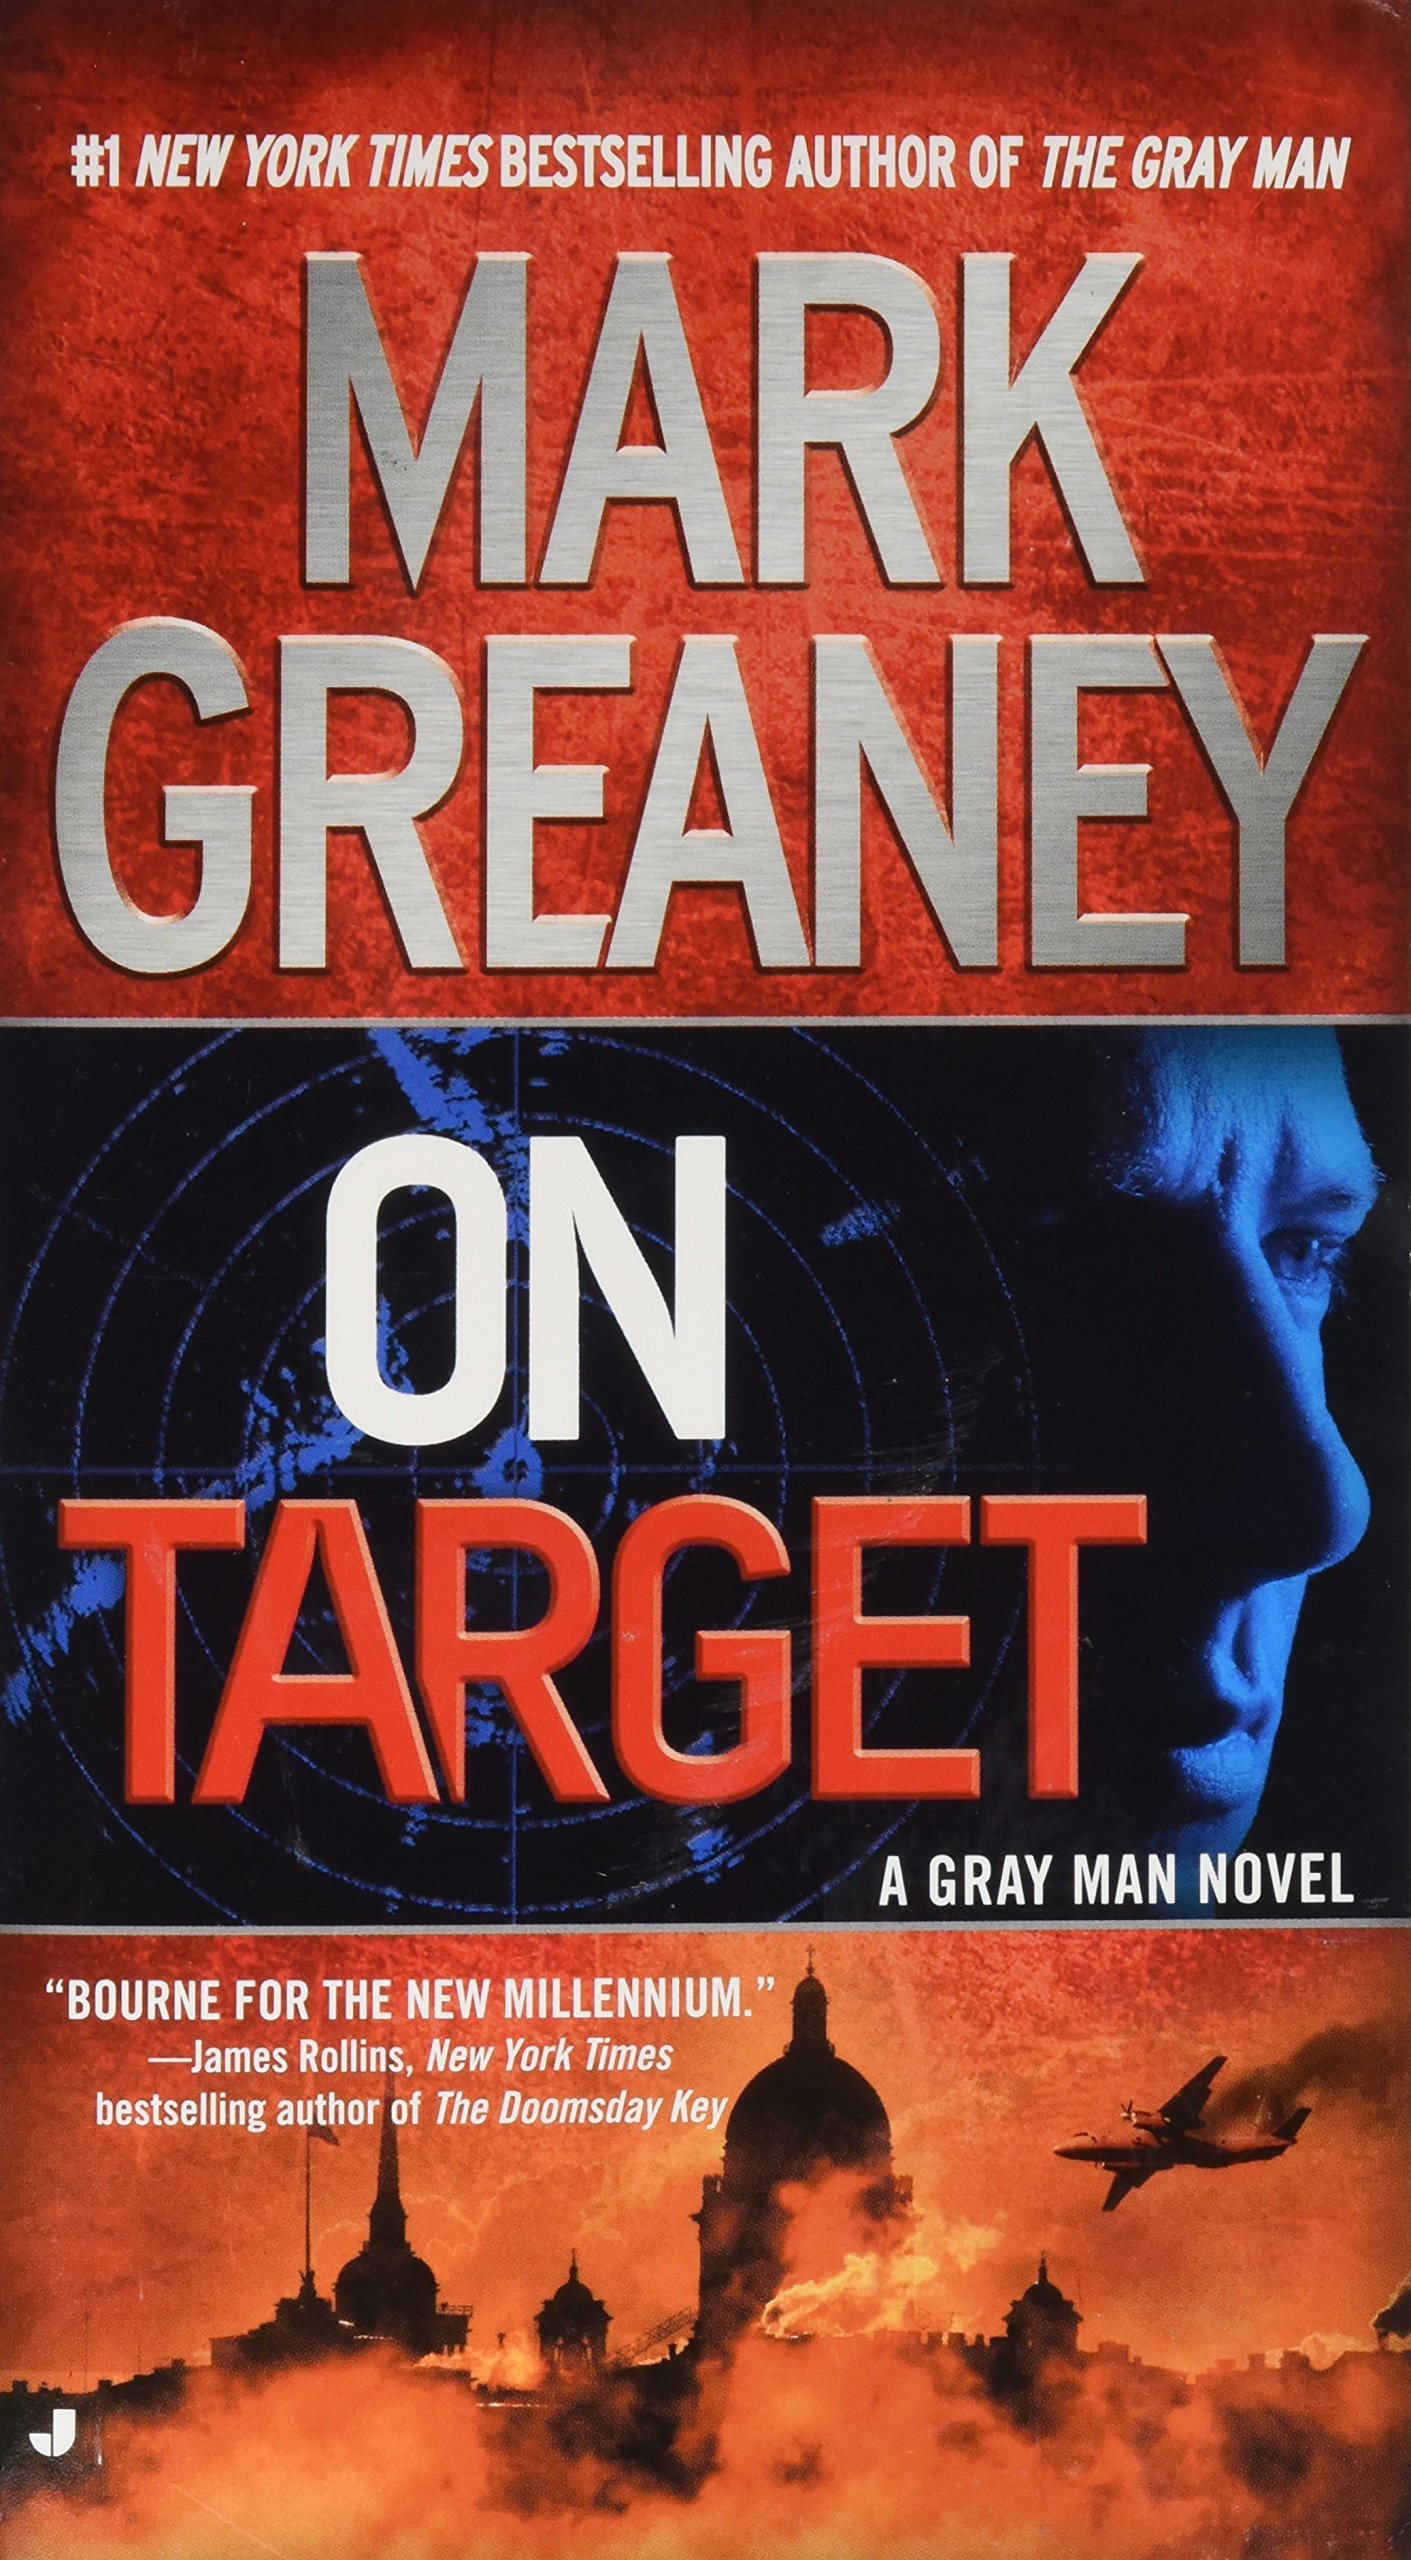 The Gray Man by Mark Greaney: 9780425276389 | : Books